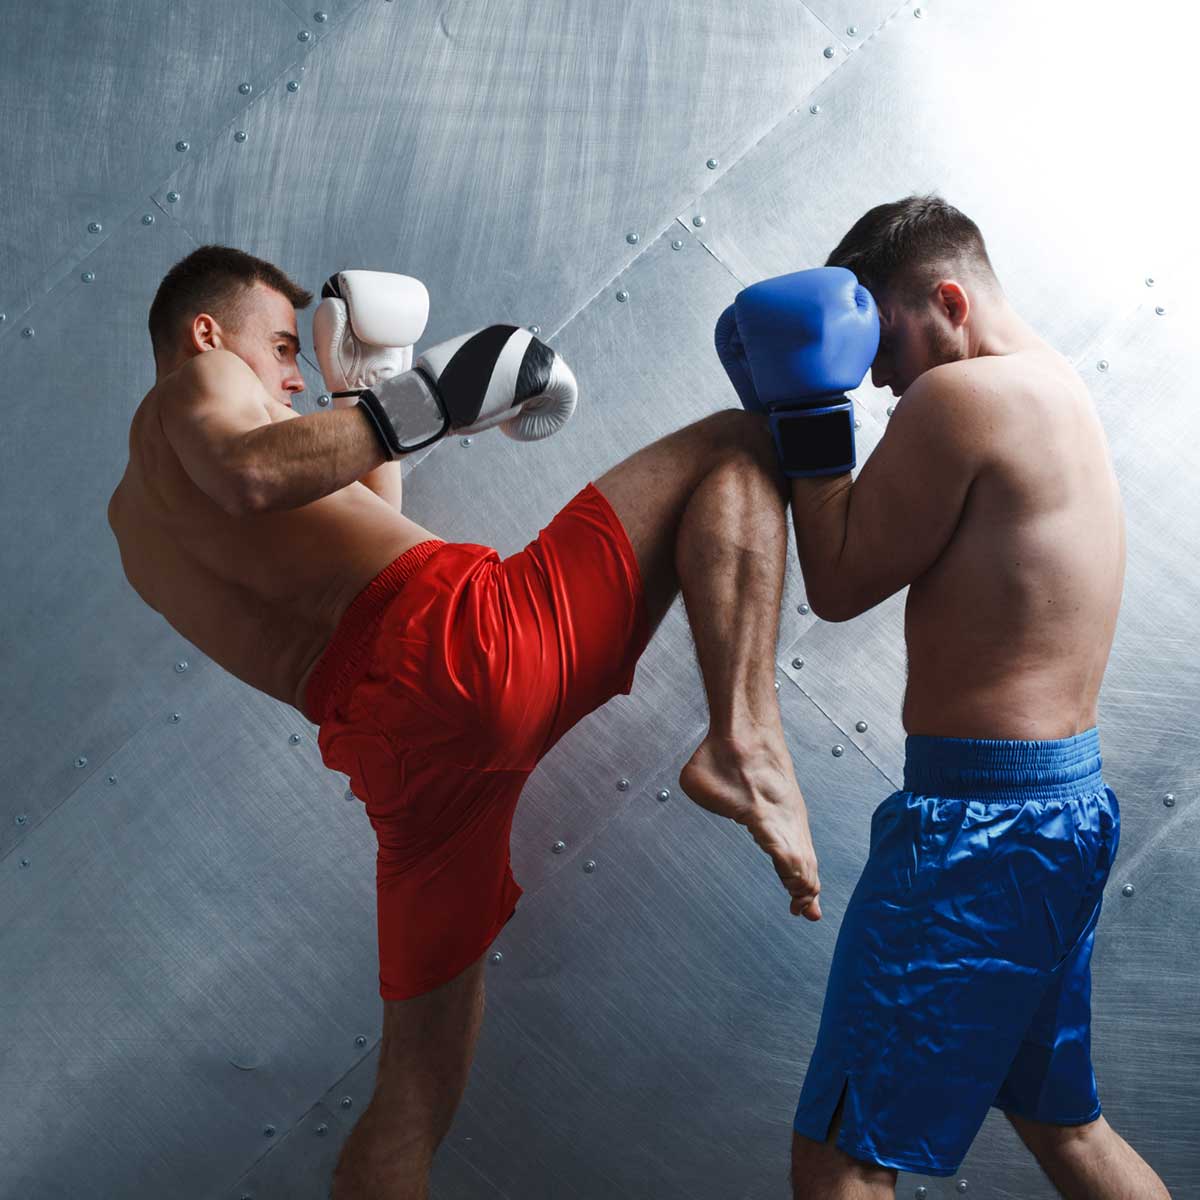 Fight Shorts Manufacturers in Chelyabinsk